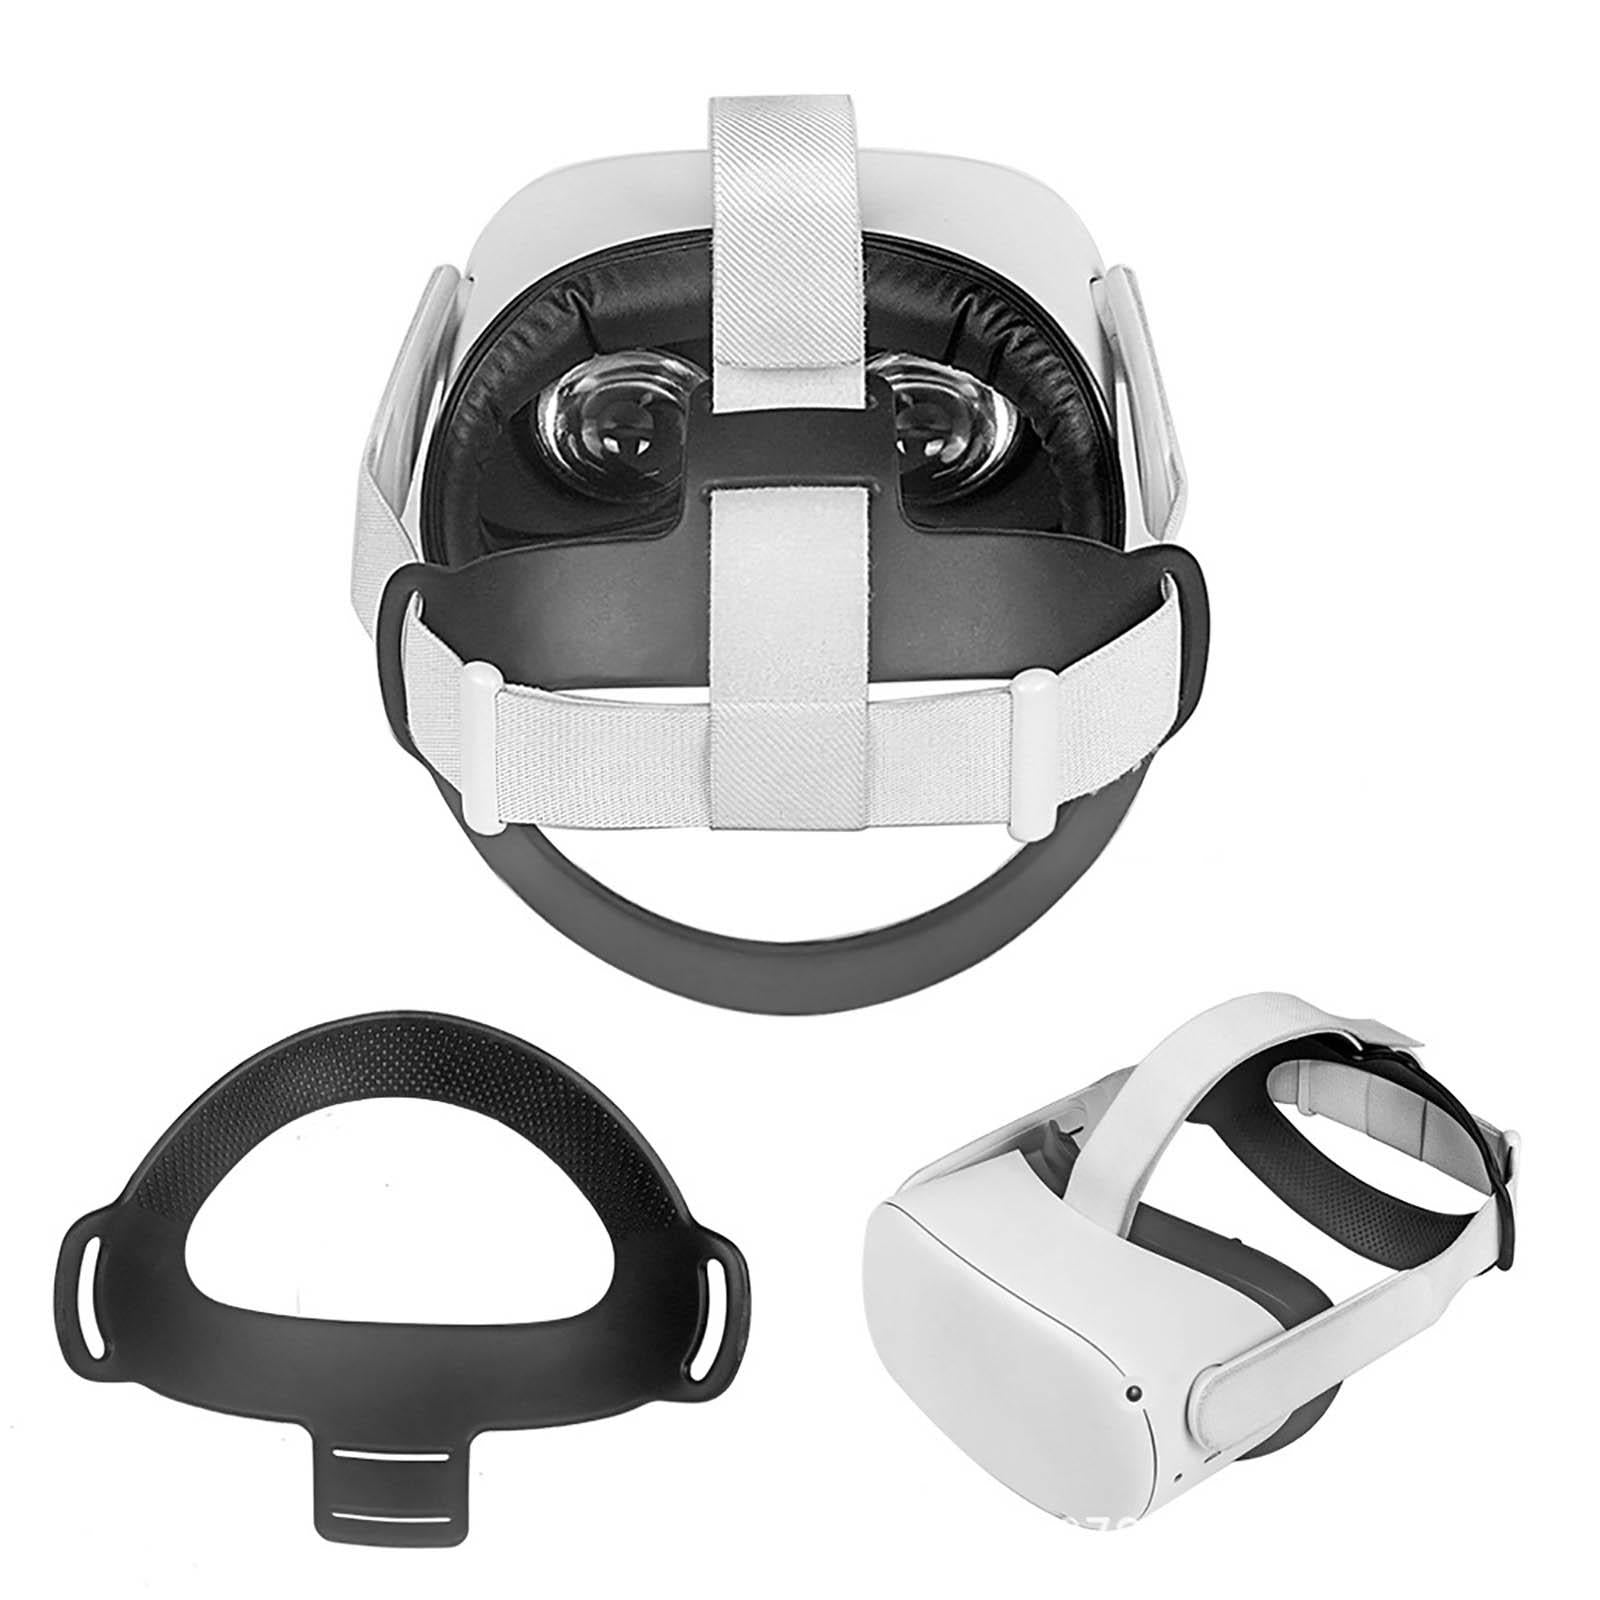 Soft Headband Cushion for Quest 2 VR Headset Removable TPU Protective Strap